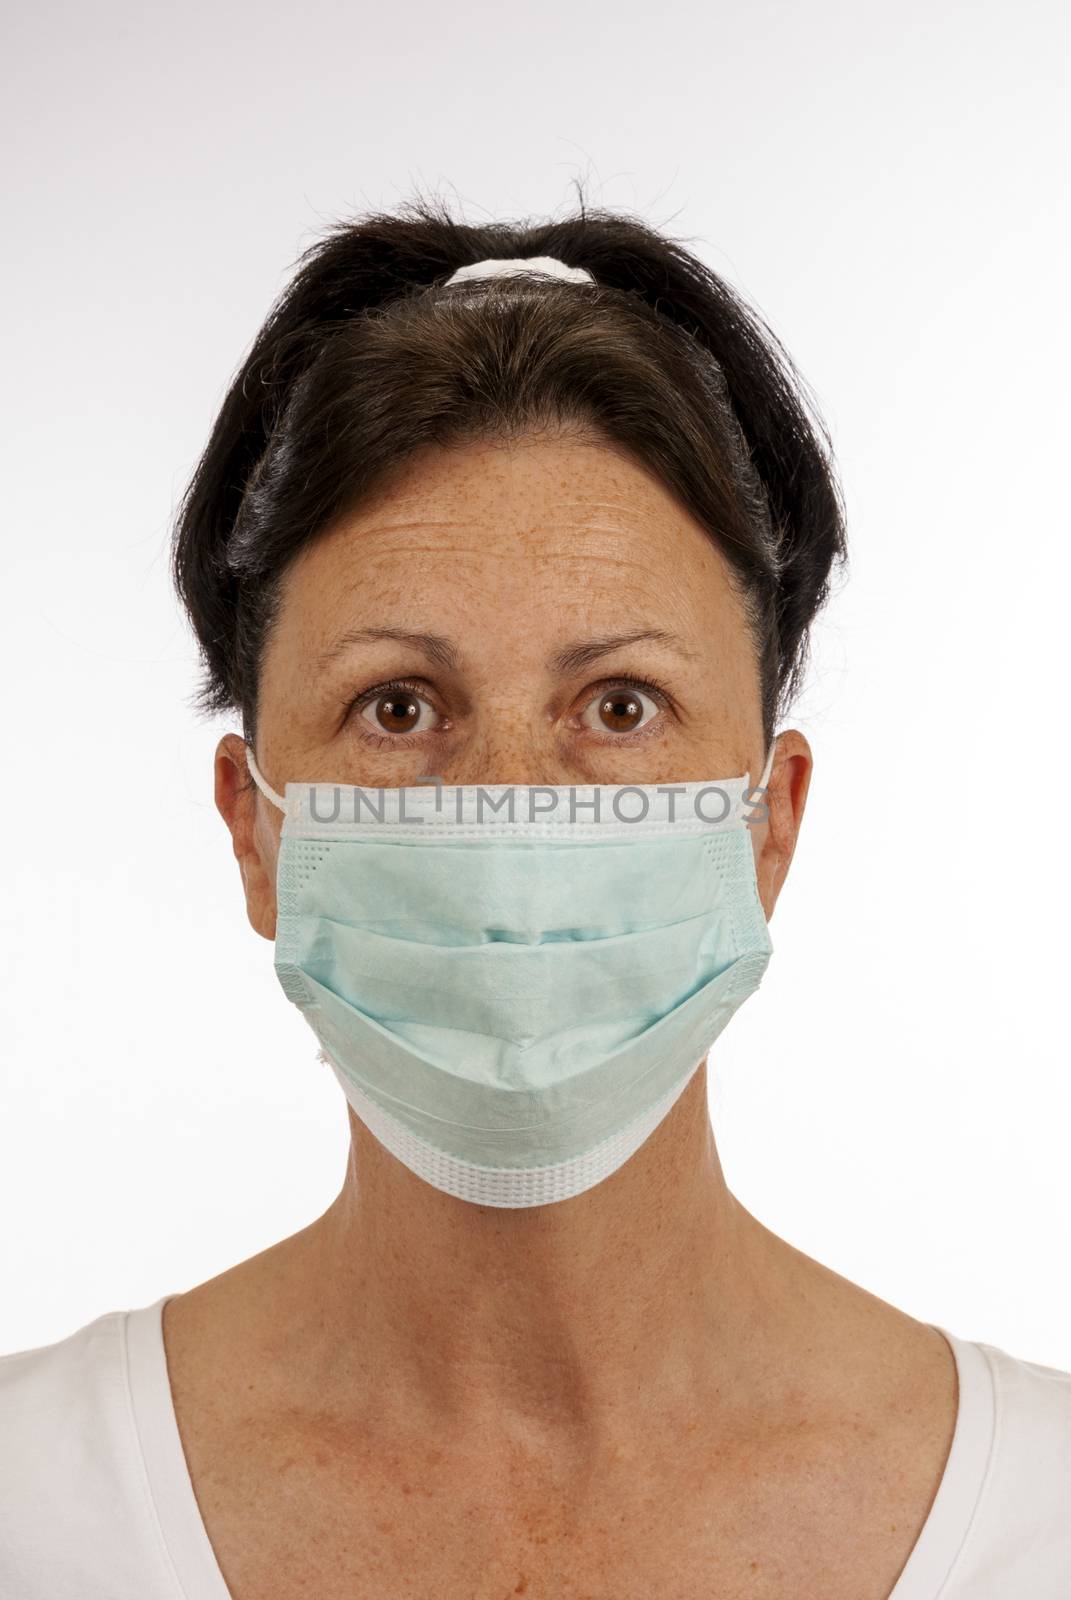 Woman Wearing Protective Mask by stockbuster1